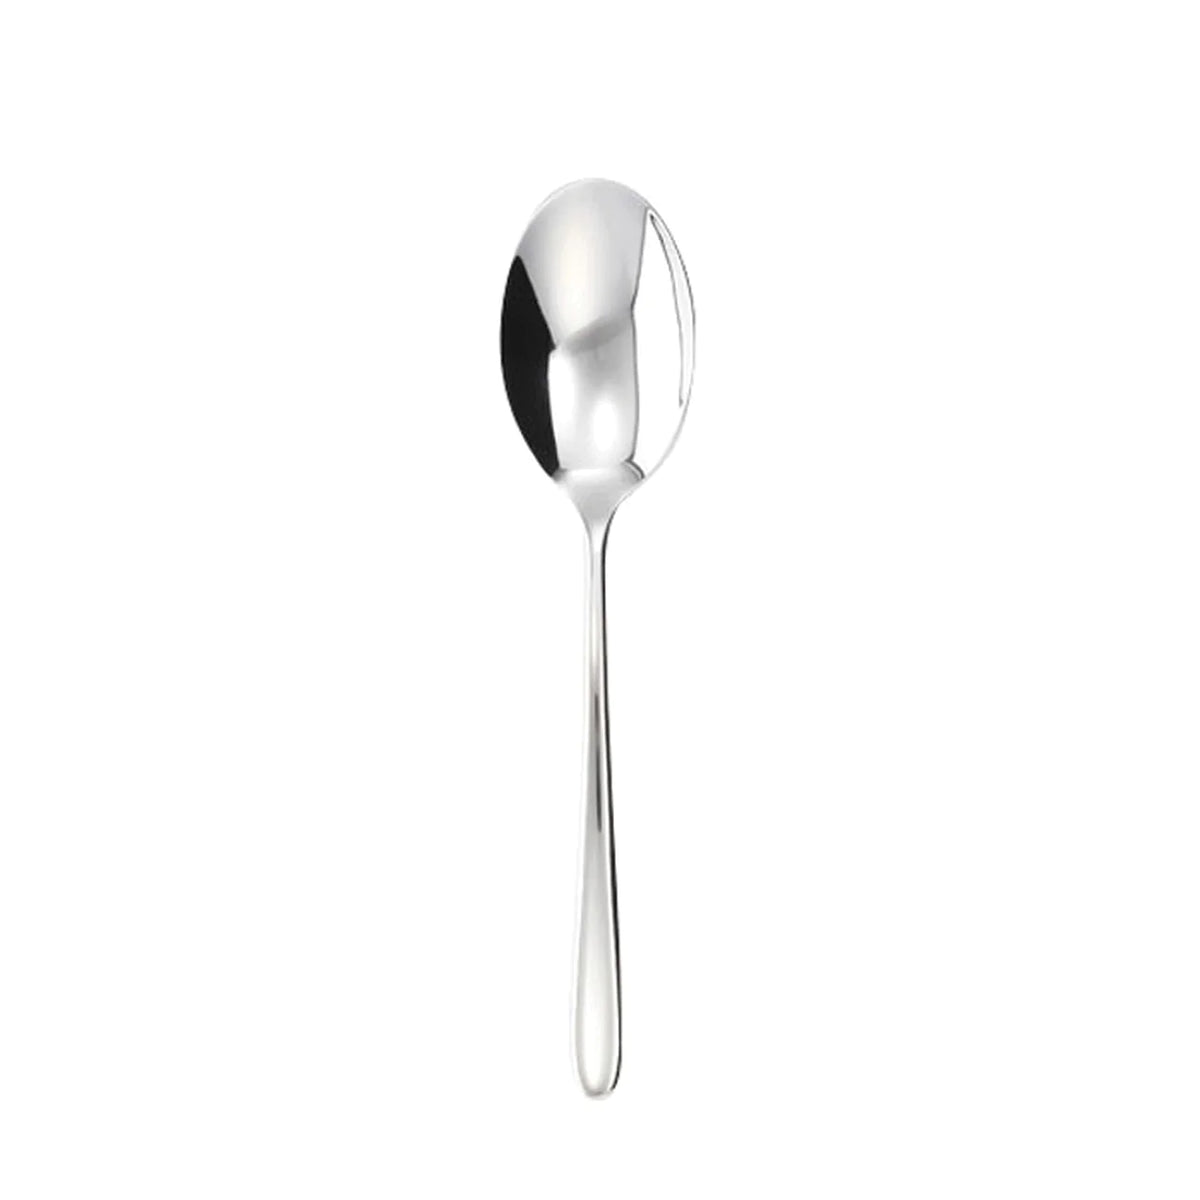 Hannah Stainless Steel Serving Spoon, 9 5/8 inch